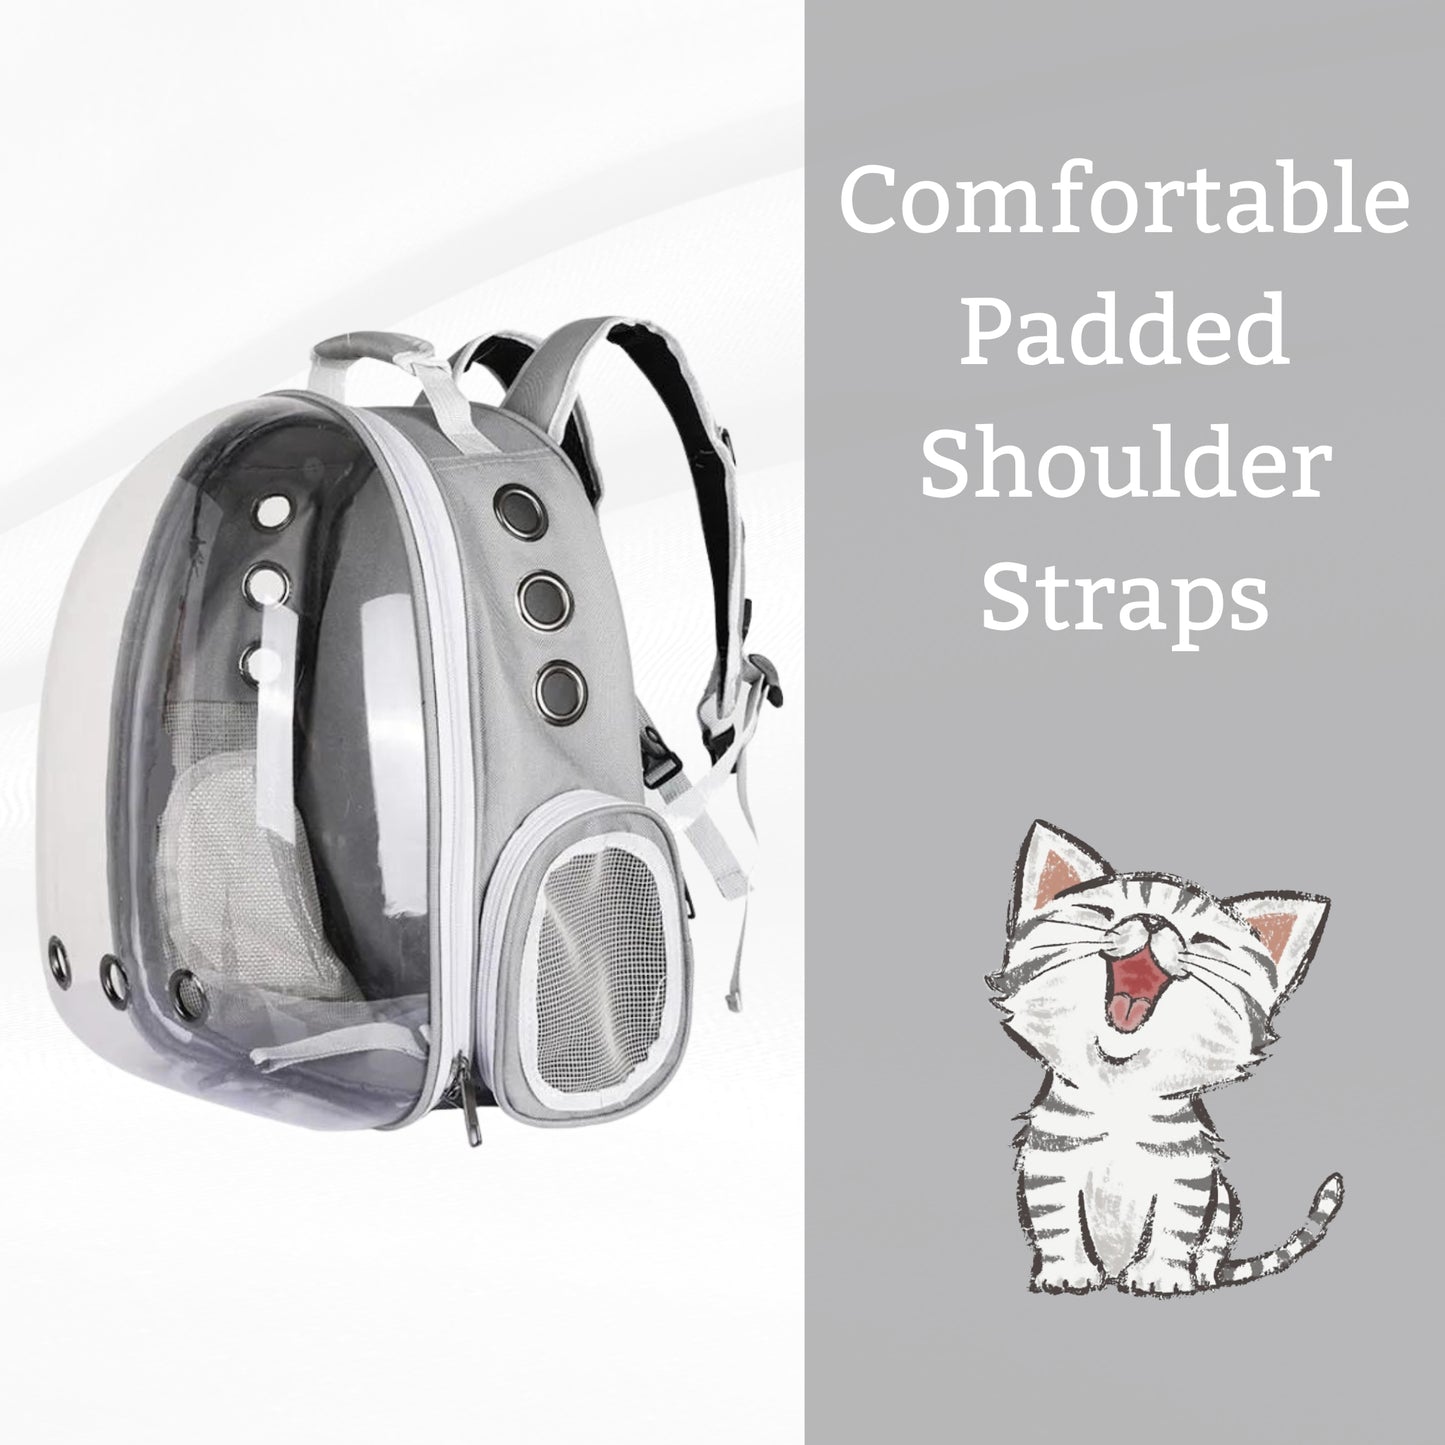 Foodie Puppies Transparent Travel Backpack for Puppies & Cats (Gray)